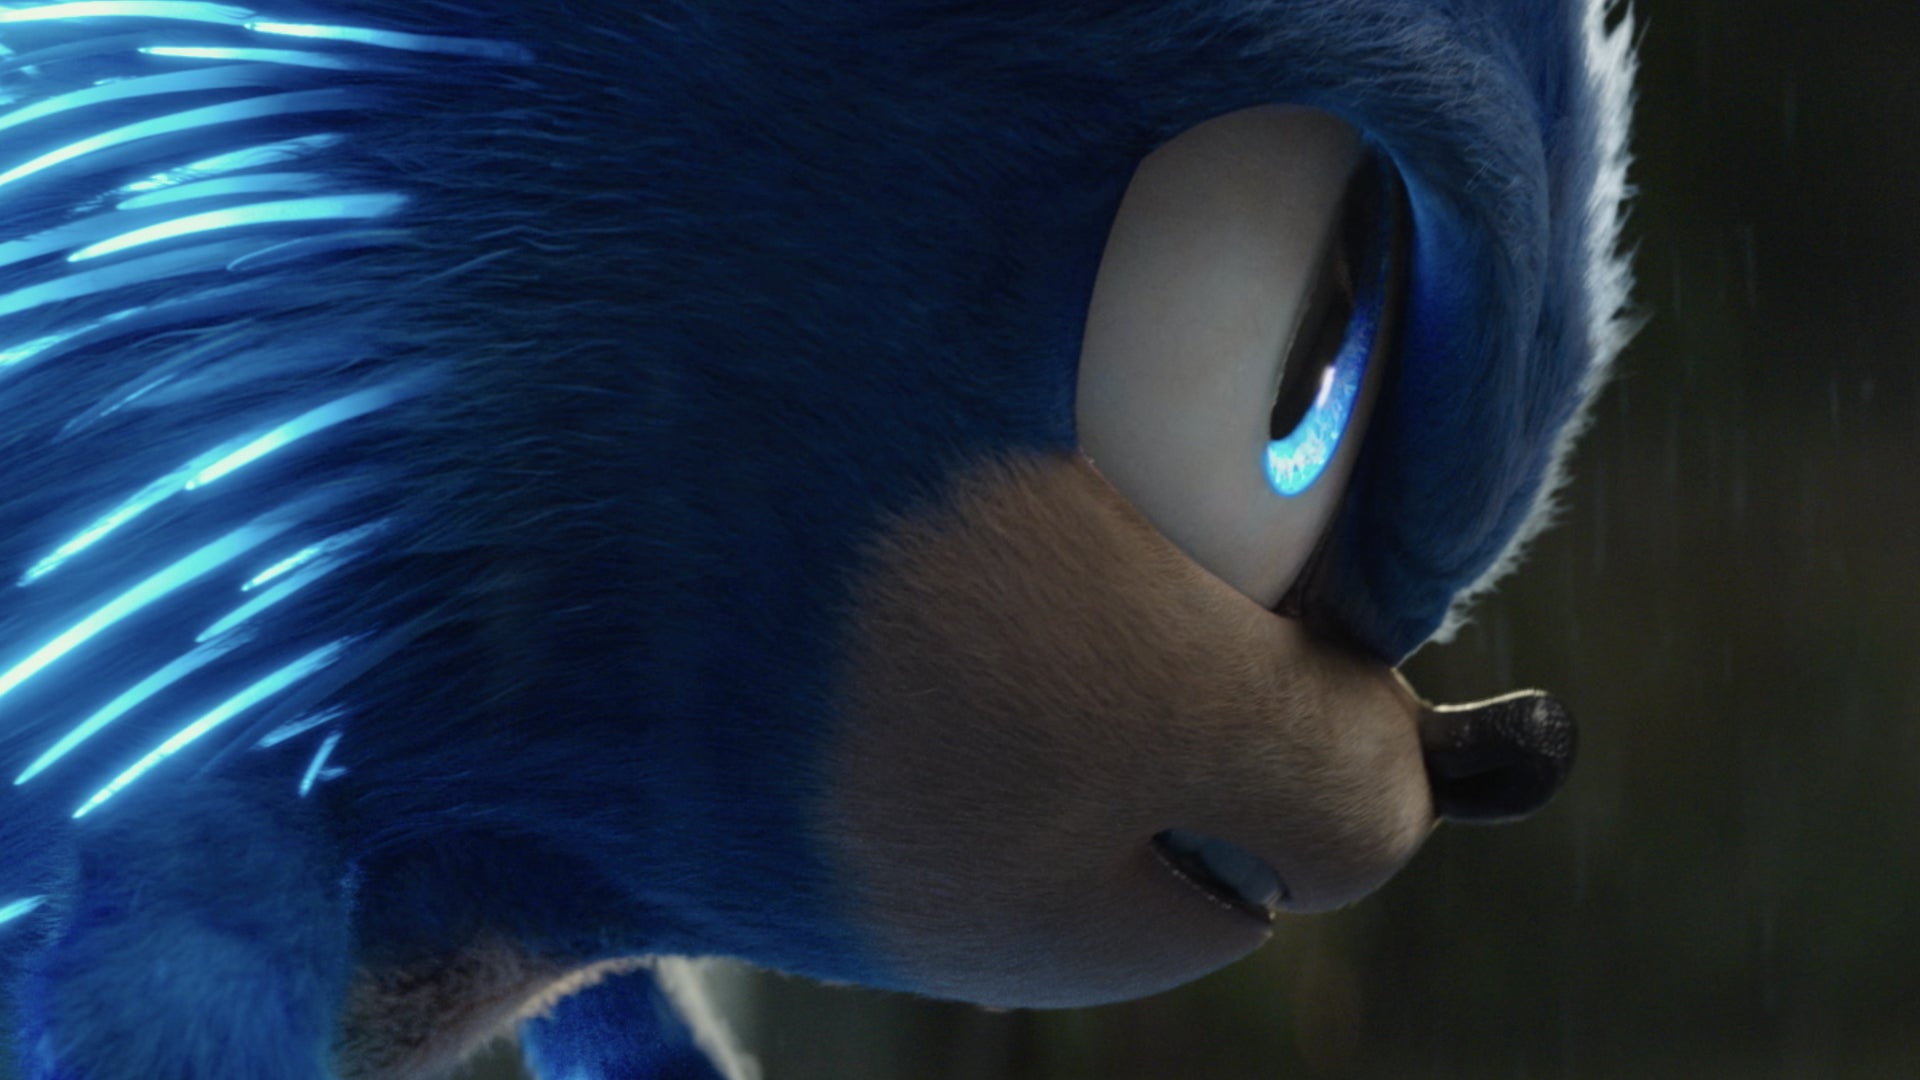 Sonic The Hedgehog 3 (2022) - “Official Trailer” - Paramount